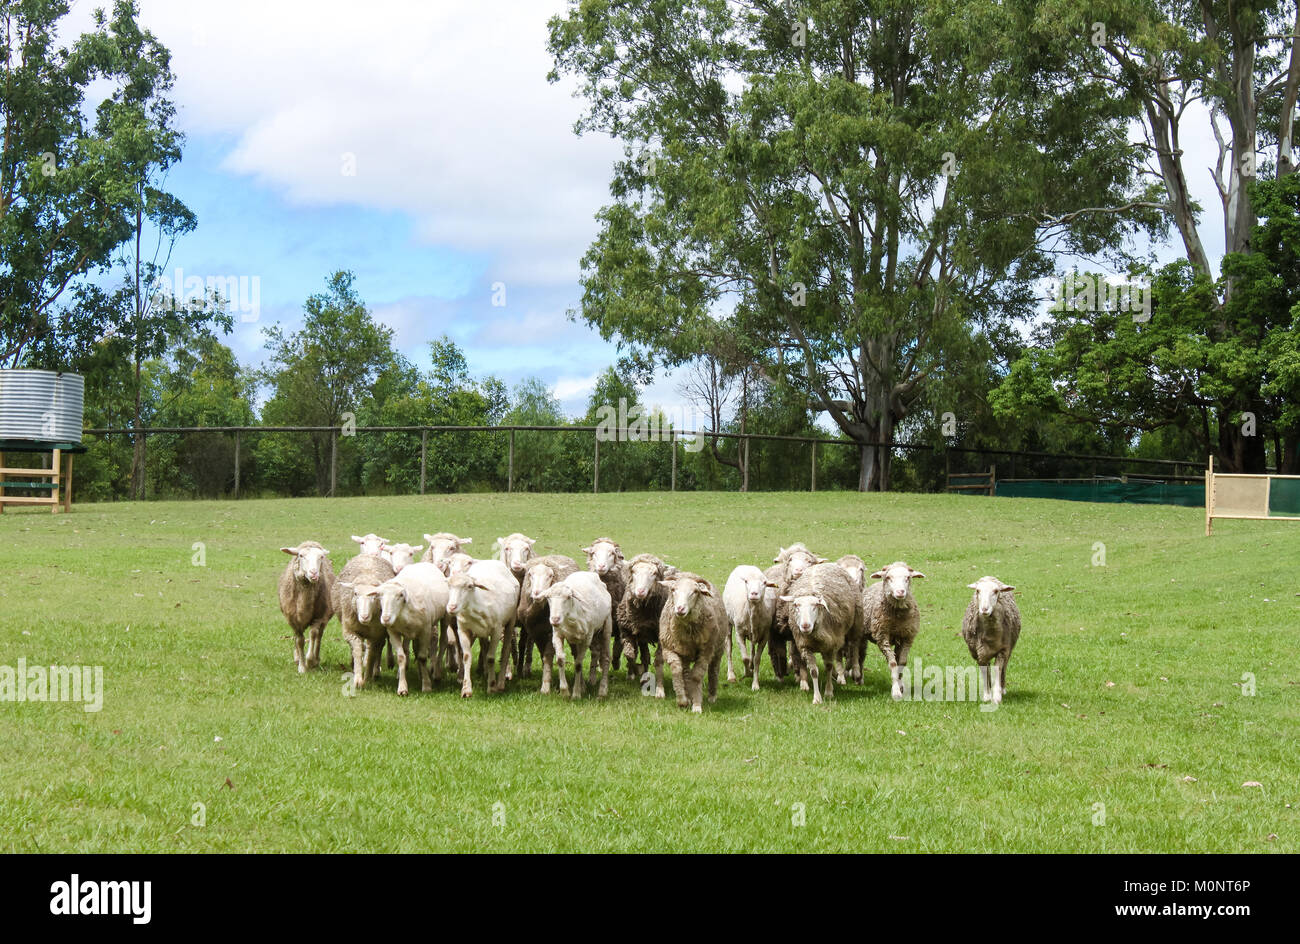 Sheep being rounded up - some shorn and some with wool - in green field with gum trees and fence in background Stock Photo